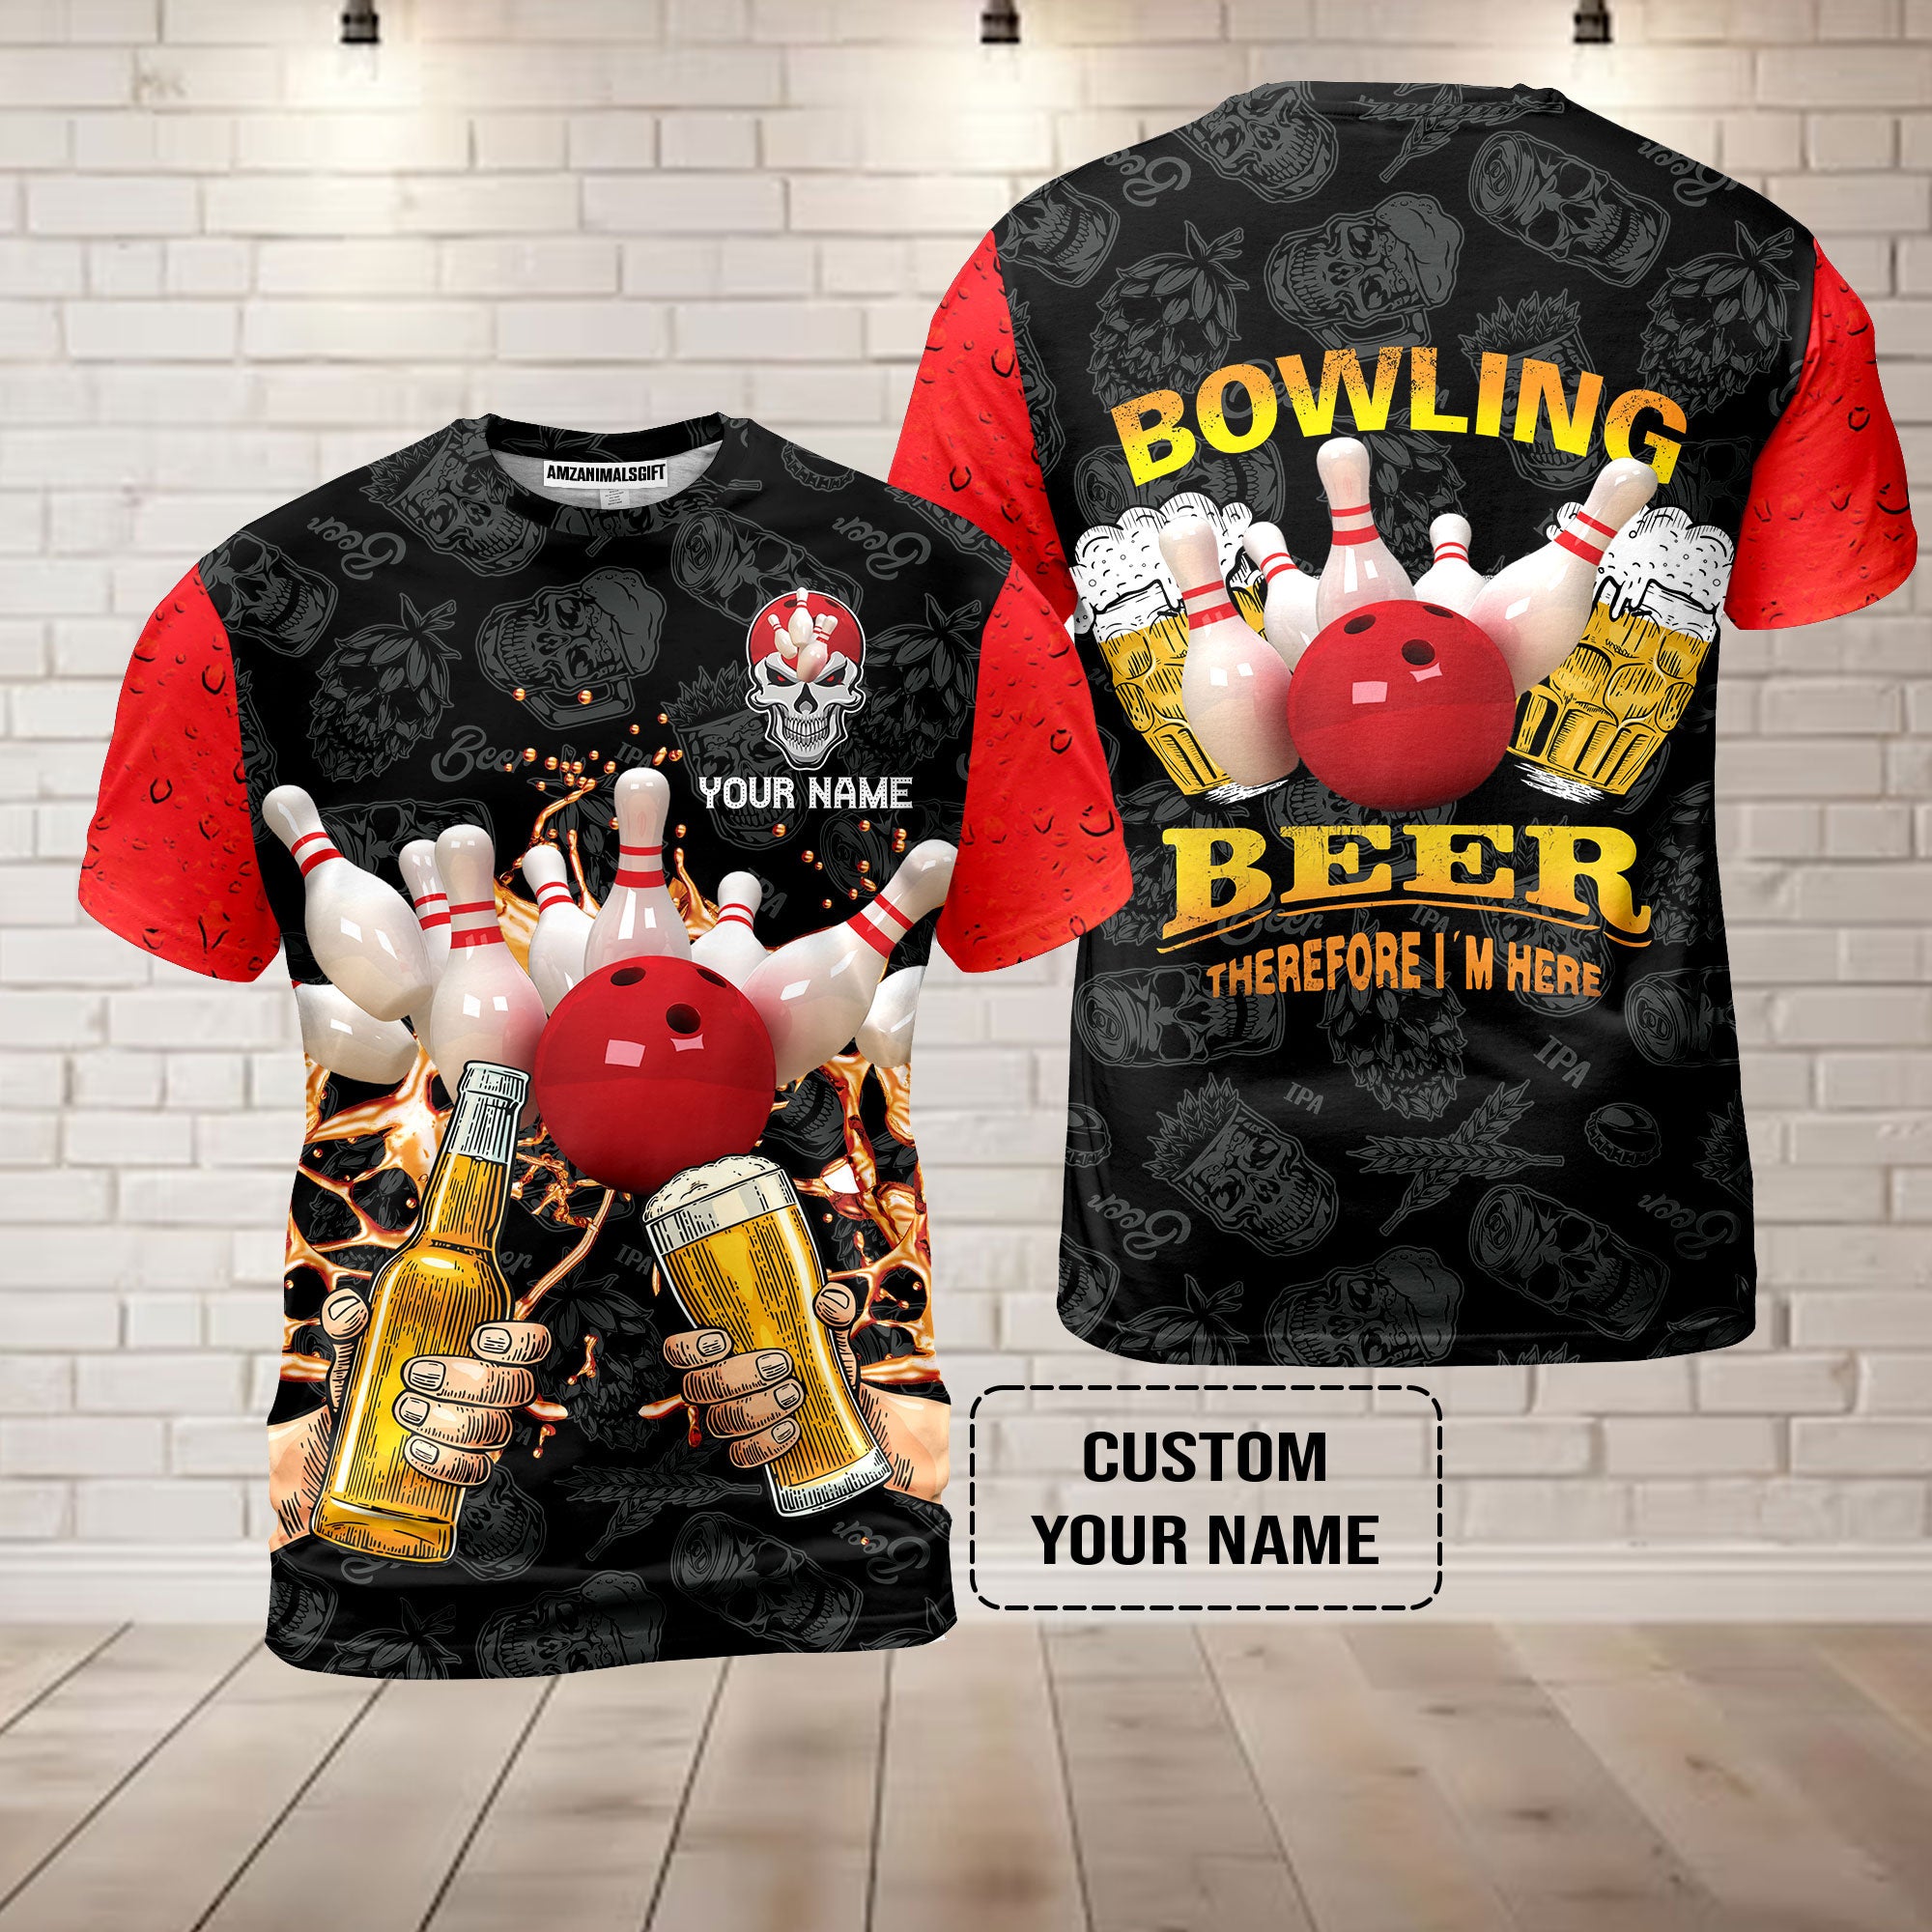 Bowling T-shirt Custom Name, Bowling and Beer Black Red Therefore I'm Here Personalized T-shirt, Gift For Friend, Bowling Lovers